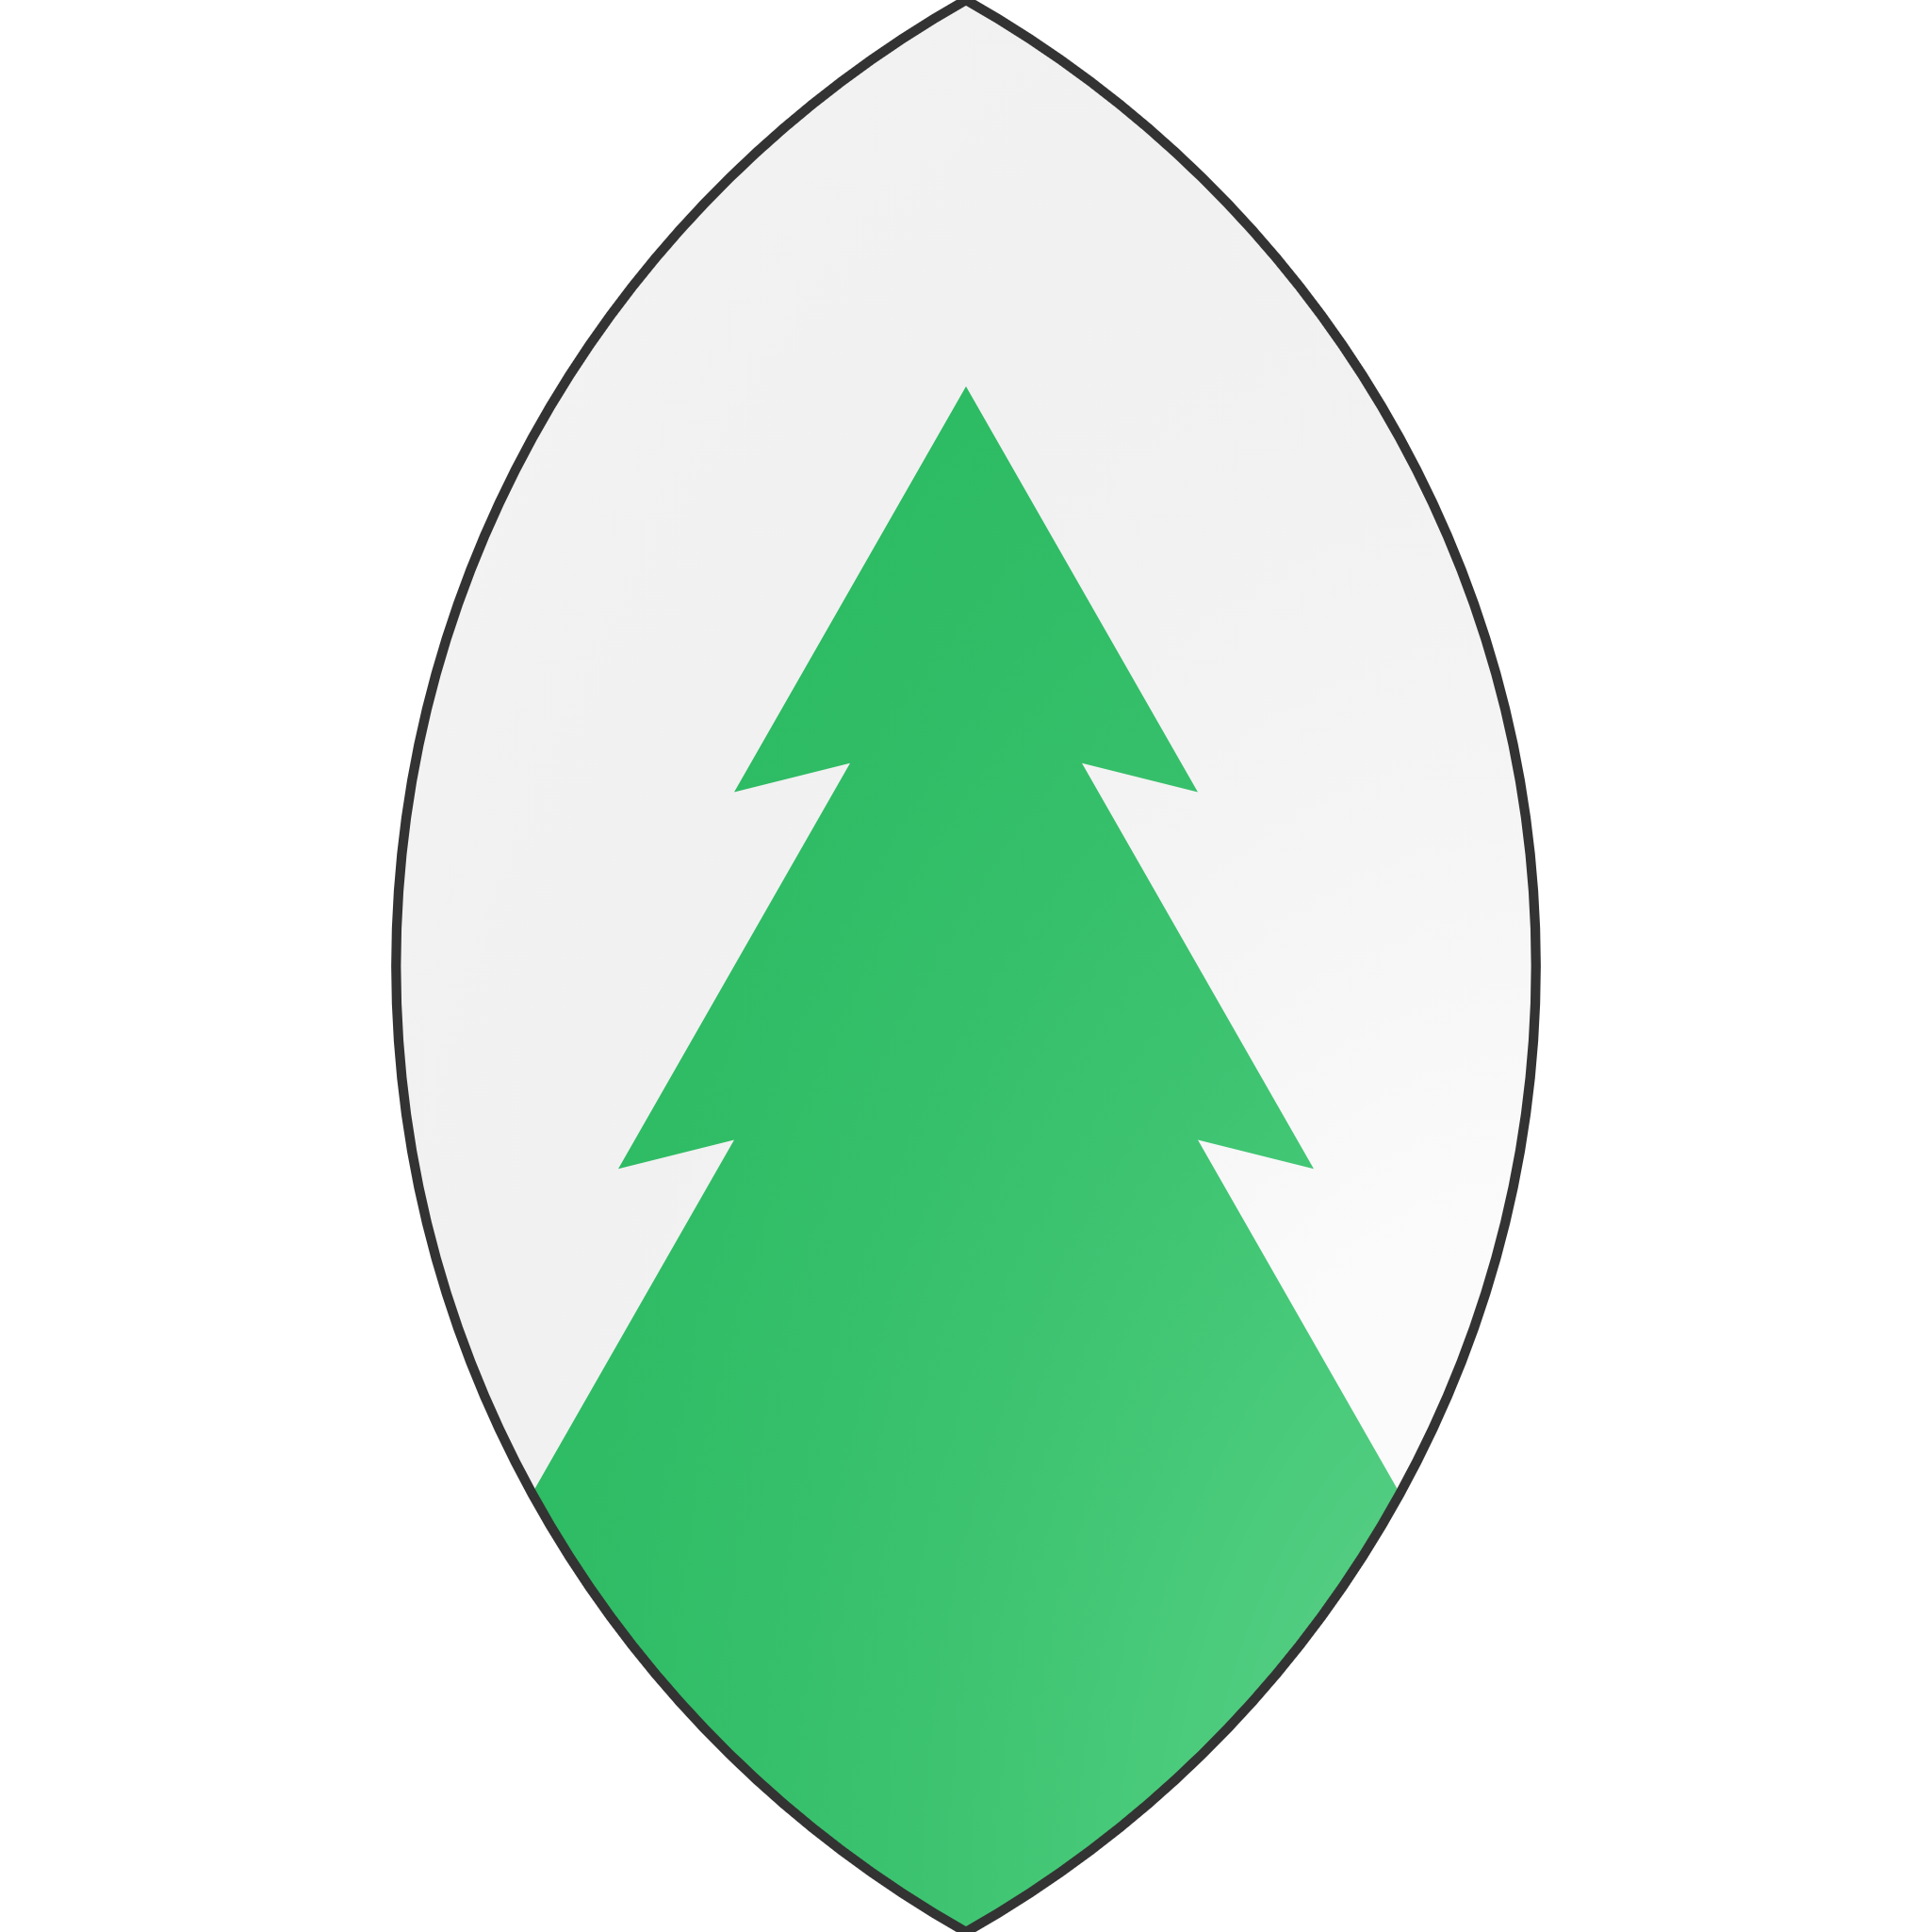 The Emblem of the White Pines Elves.